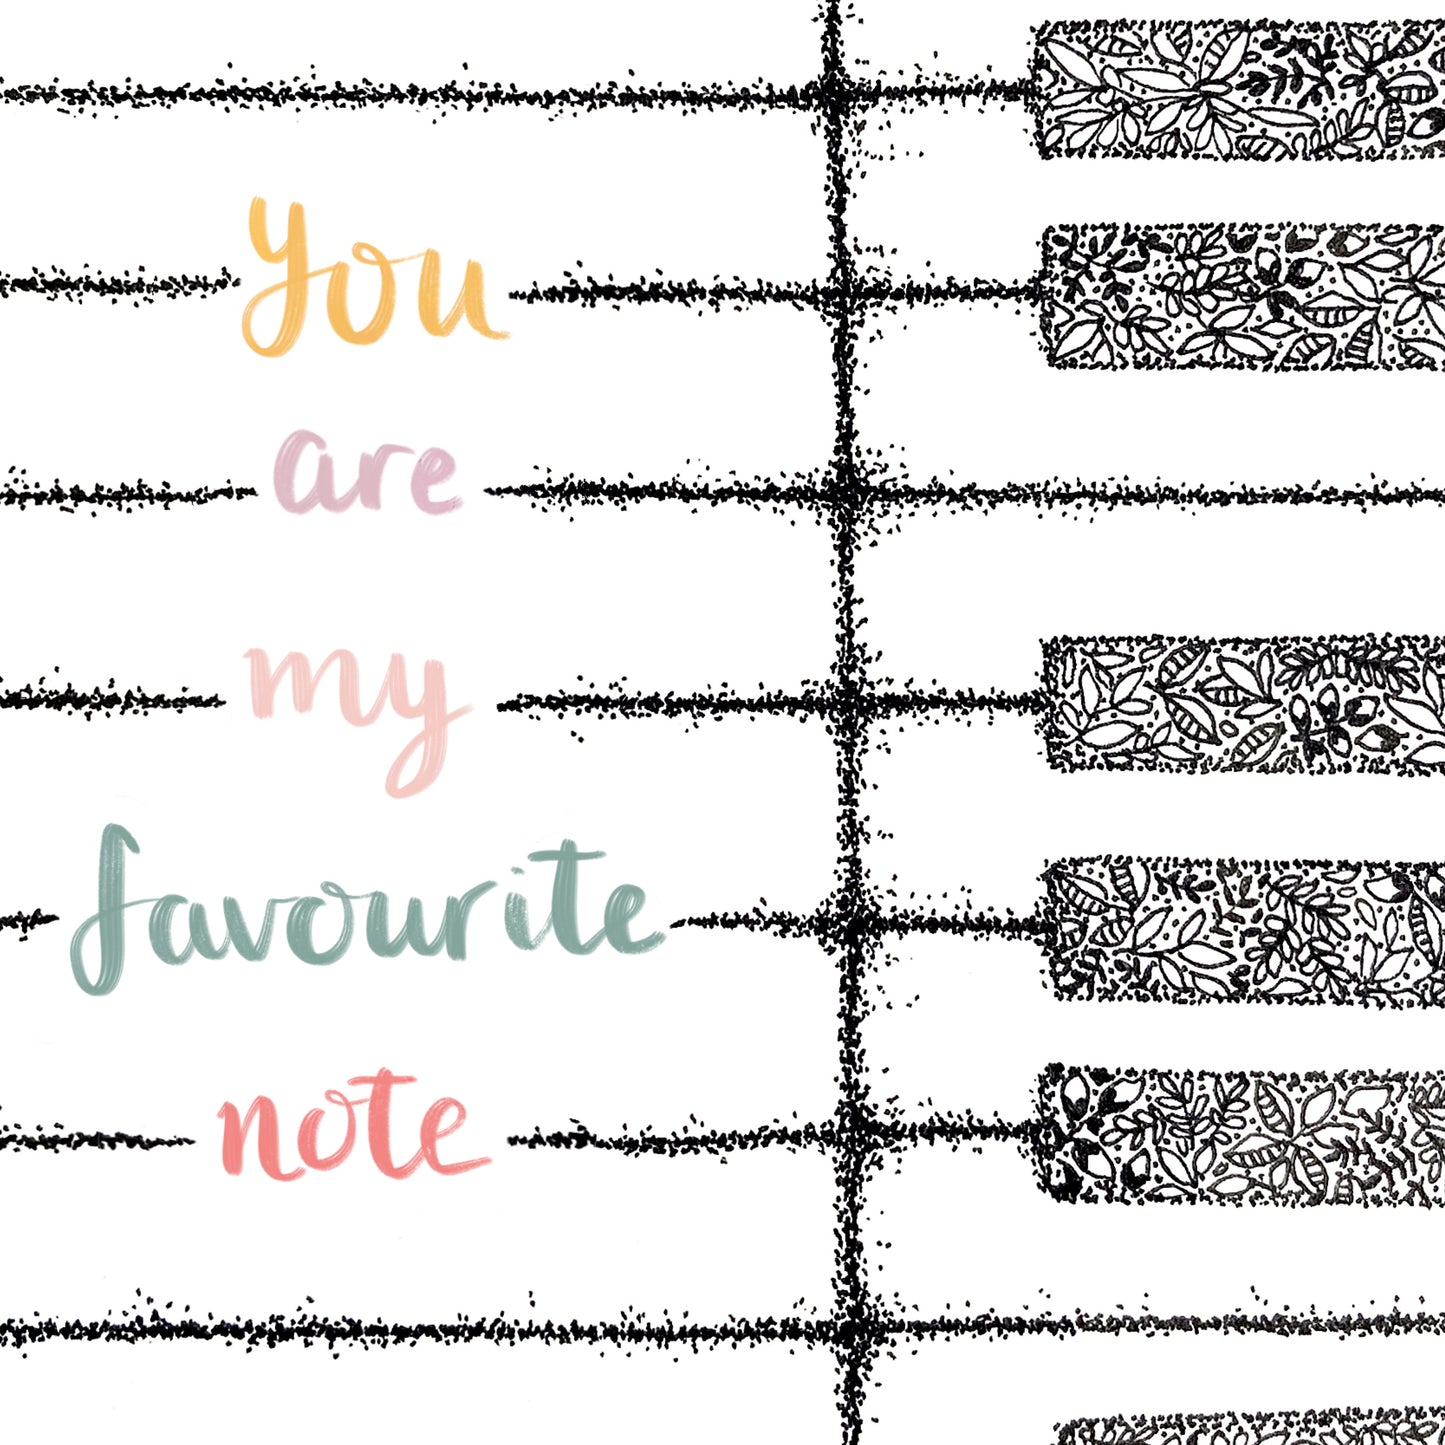 image shows a note list with the phrase ' YOU ARE MY FAVEOURITE NOTE' written down the middle of the illustration. the lines to write on are drawn from thousands of dots and there's floral designs on the right hand side. Image is shown in a close up view to display the detailed illustrations. 